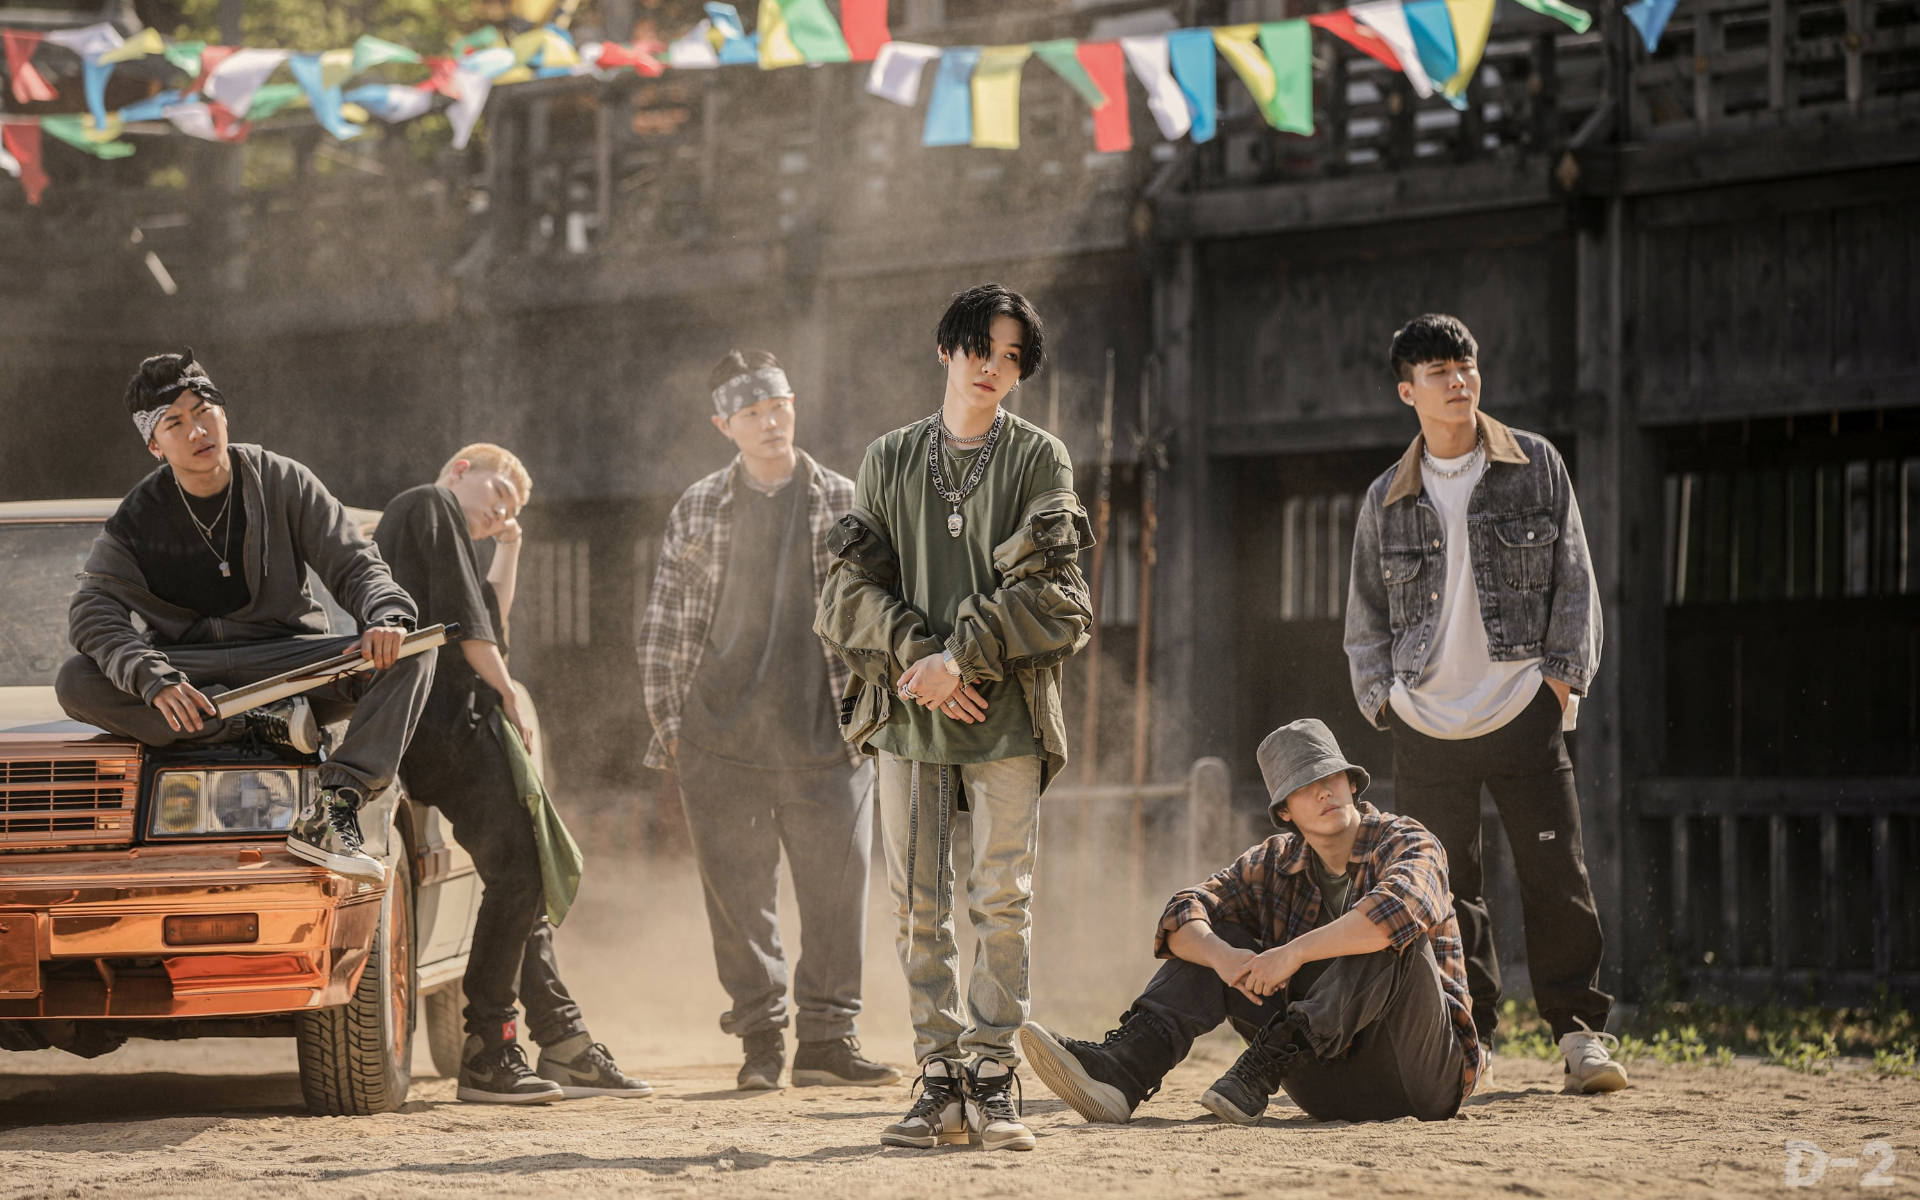 Bts Group Photo Rugged Look